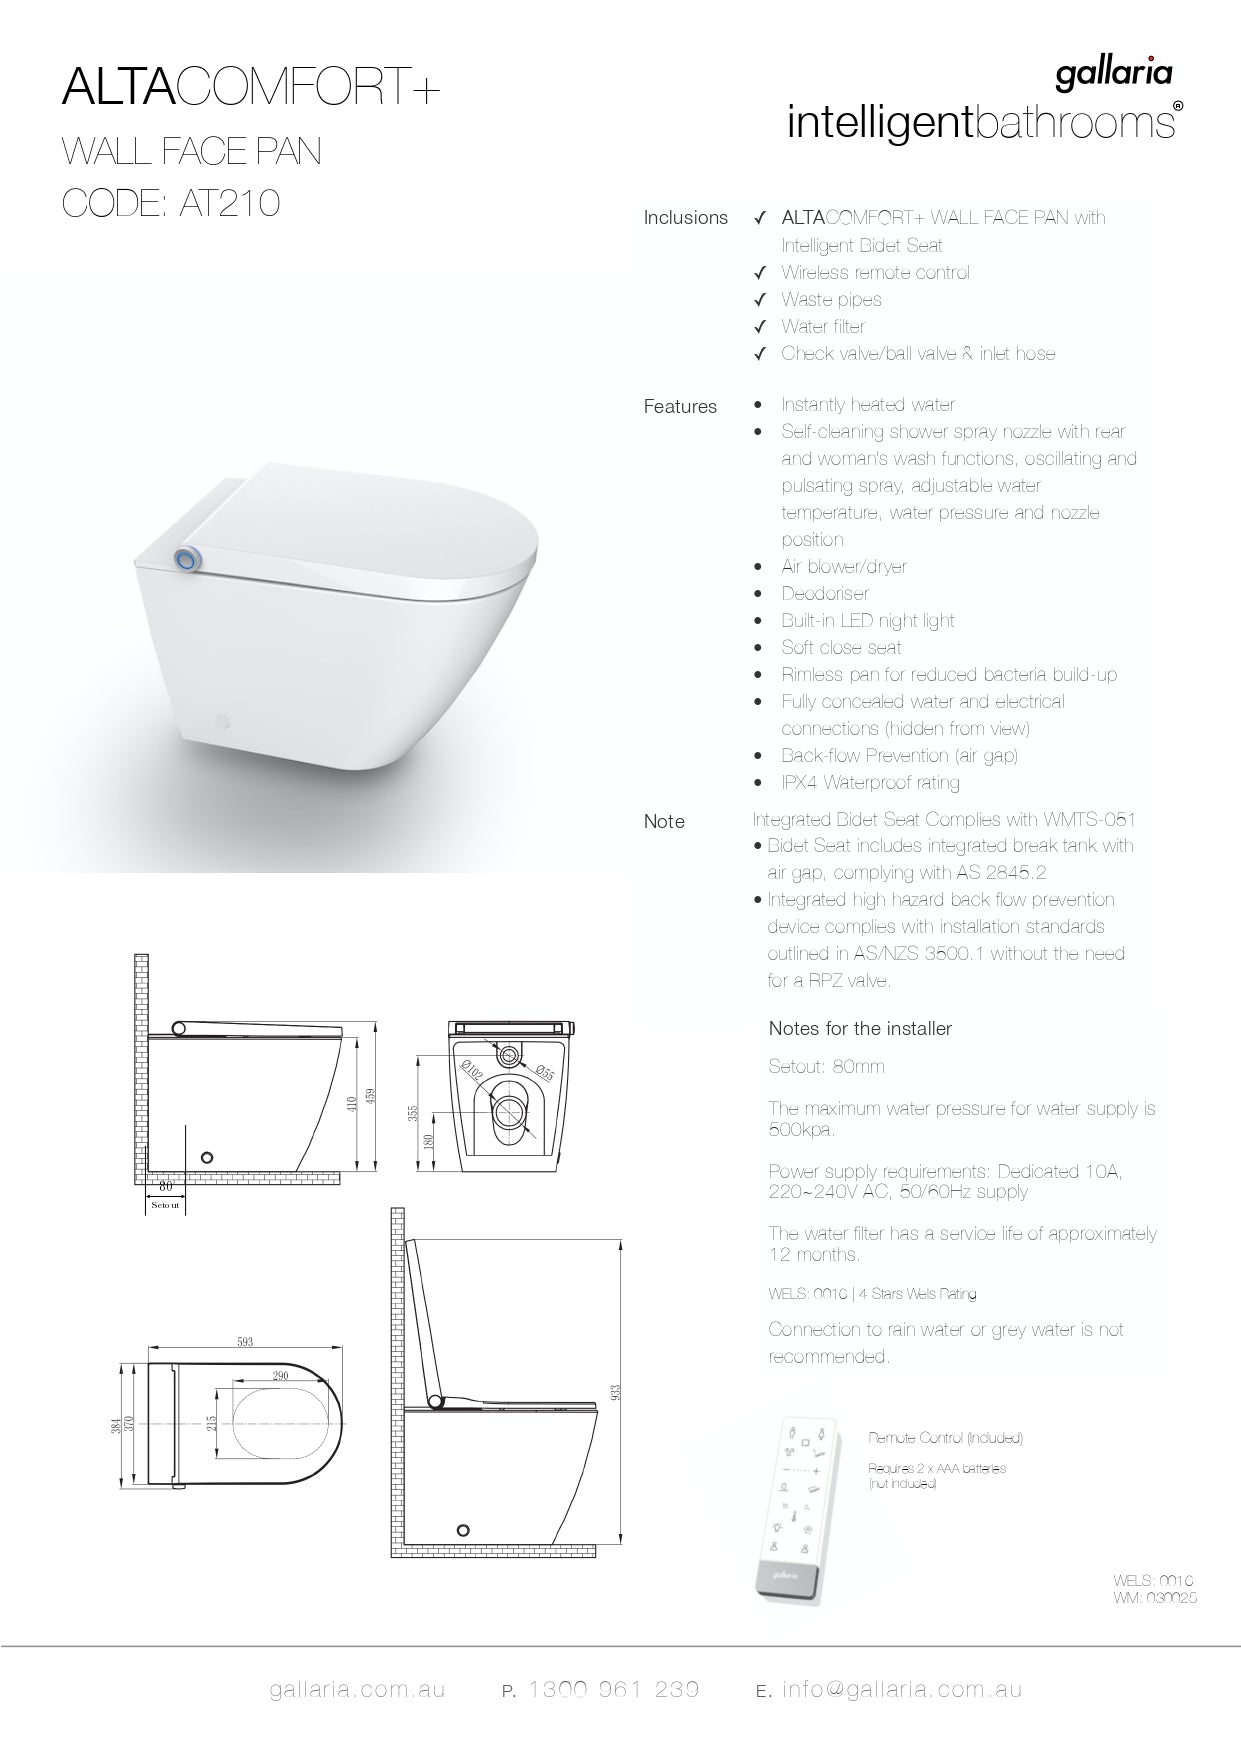 GALLARIA ALTA COMFORT RIMLESS WALL FACE PAN AND REMOTE WASHLET PACKAGE GLOSS WHITE